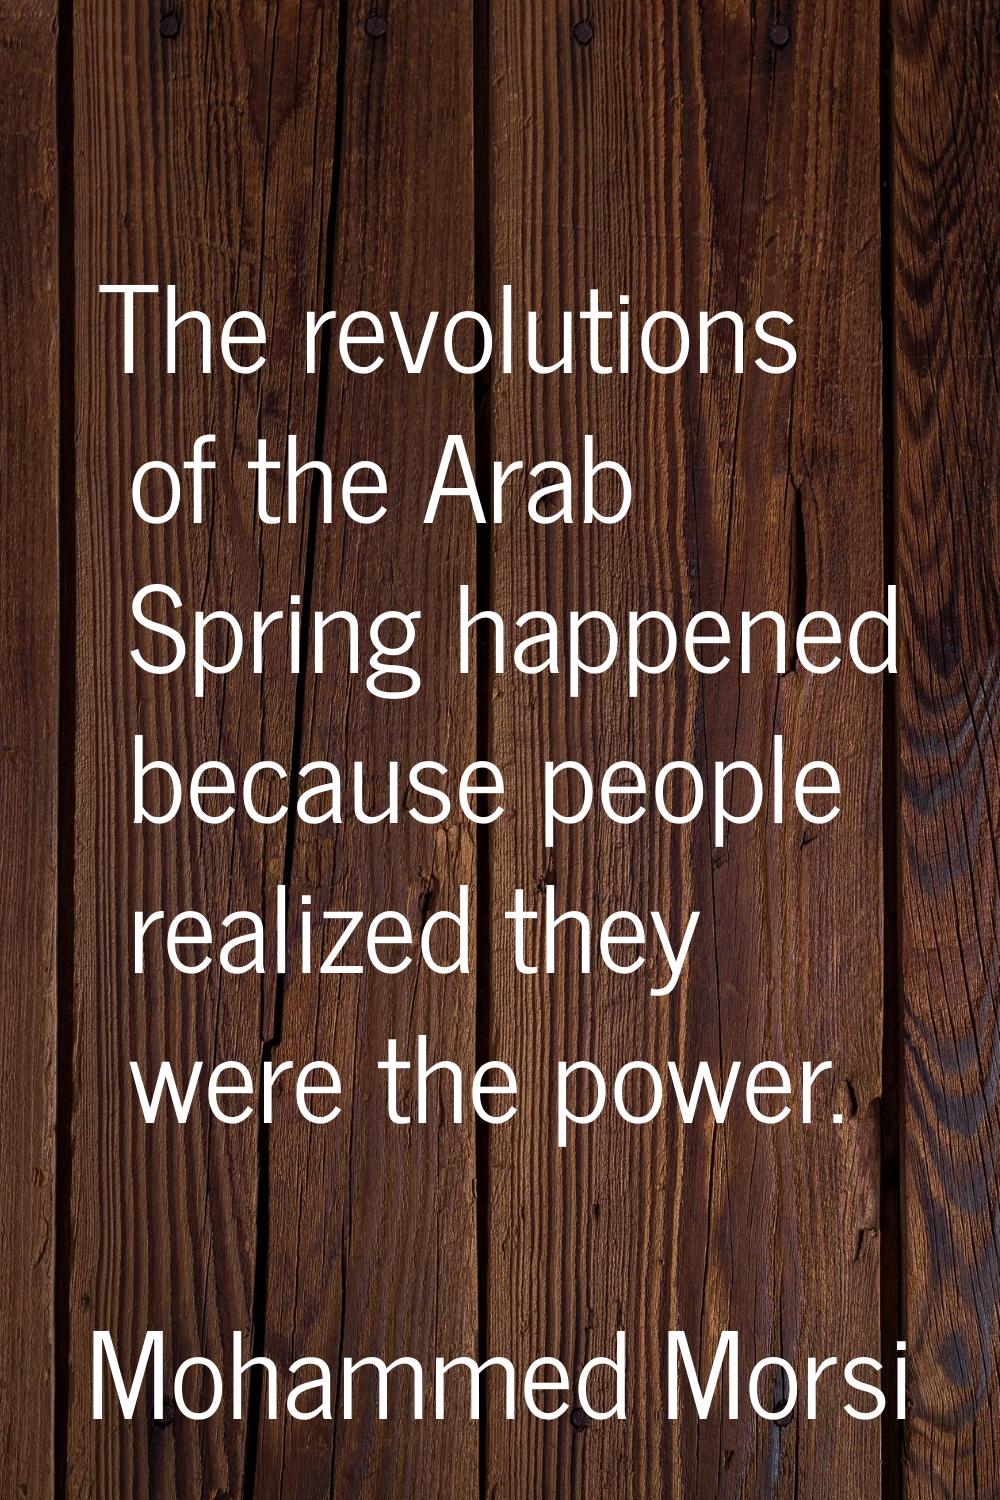 The revolutions of the Arab Spring happened because people realized they were the power.